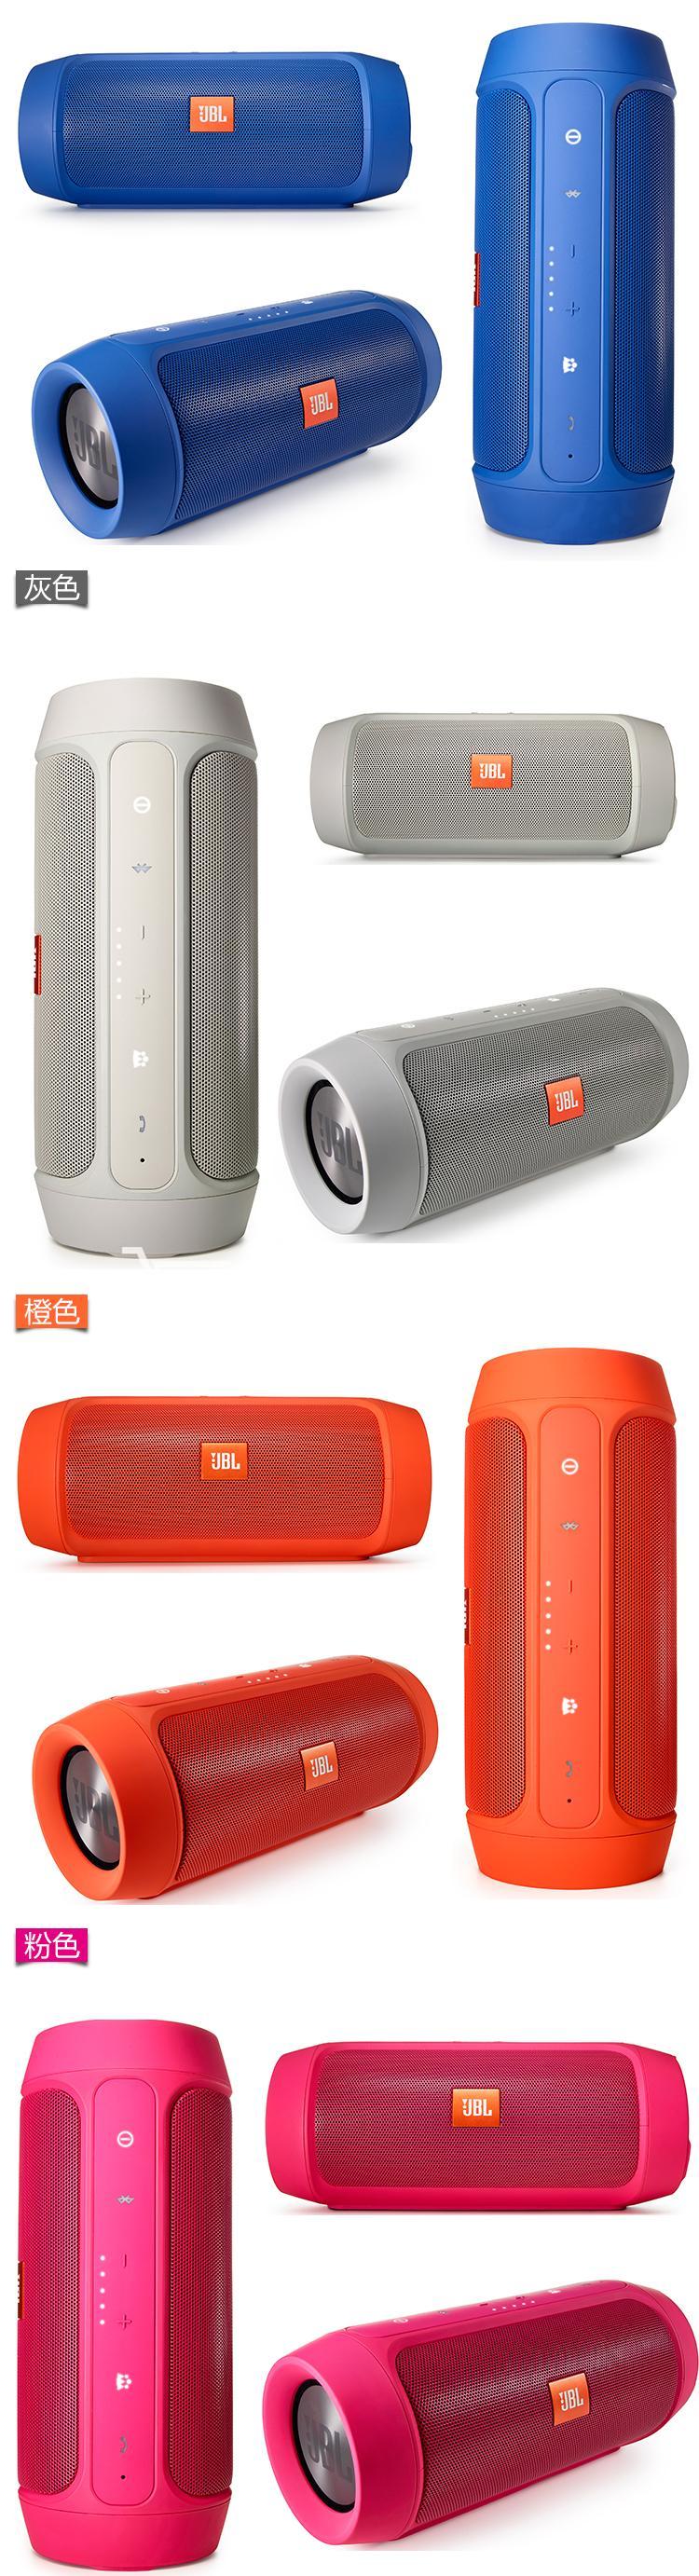 Best Deal Jbl Charge 2 Portable Bluetooth Speaker With Usb Charger Power Bank Buyone Lk Online Shopping Store Send Gifts To Sri Lanka Buy Online Store In Sri Lanka